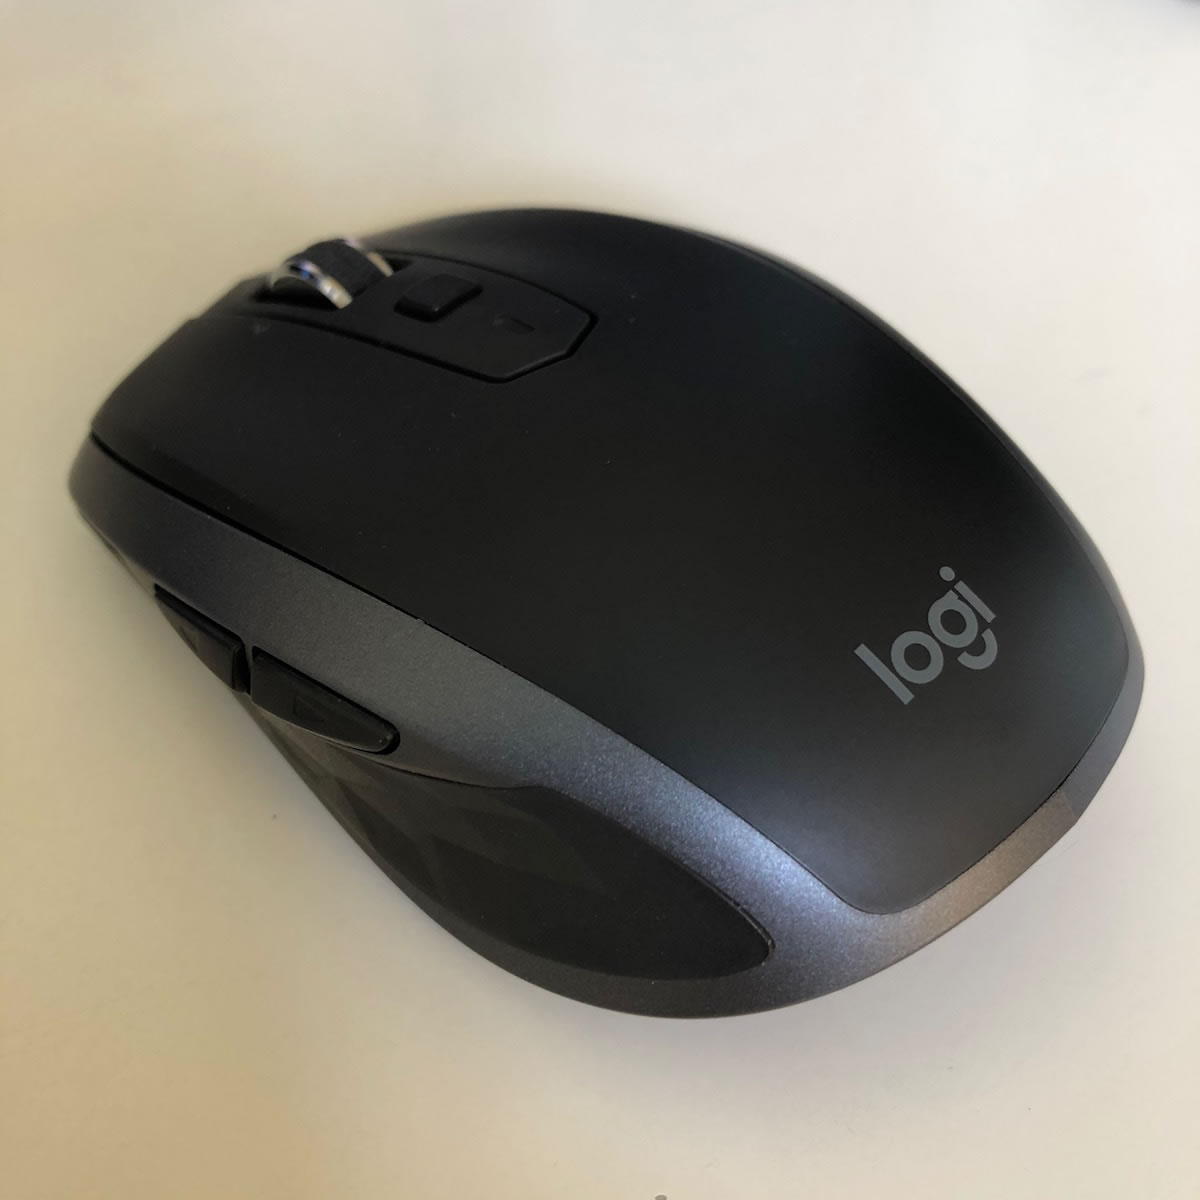 My preferred mouse when on the go or at home.